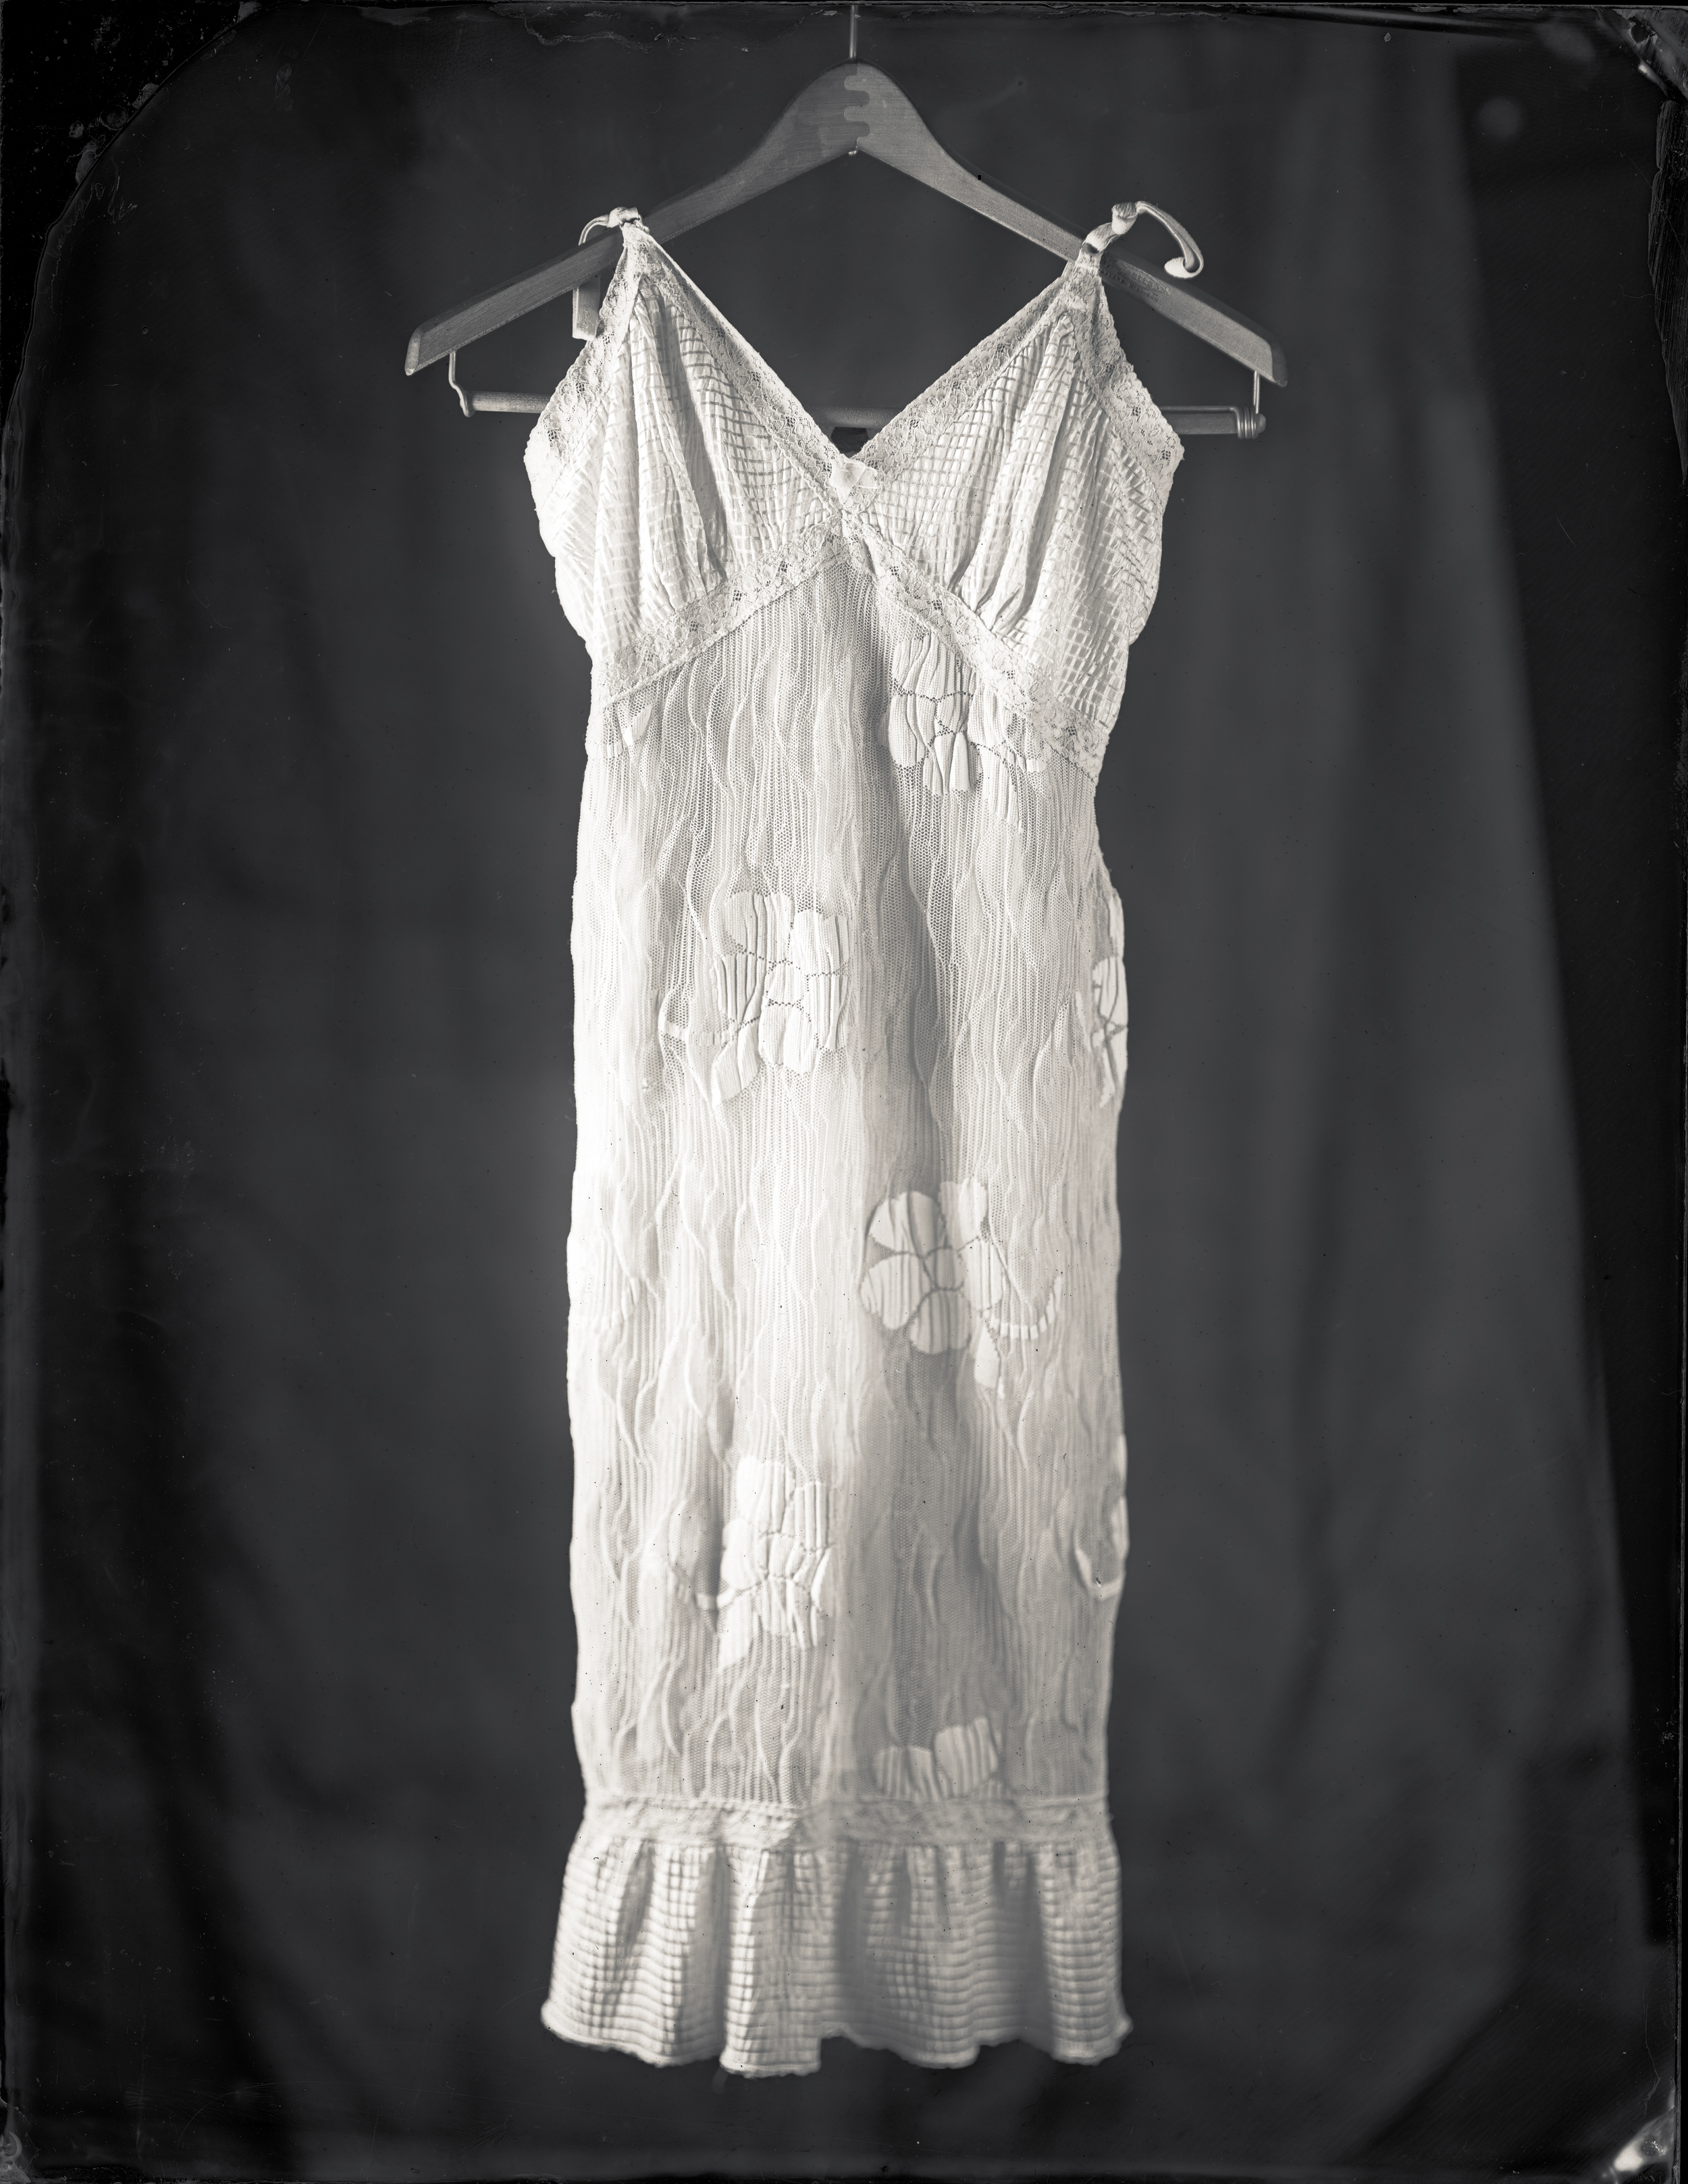 Nightgown